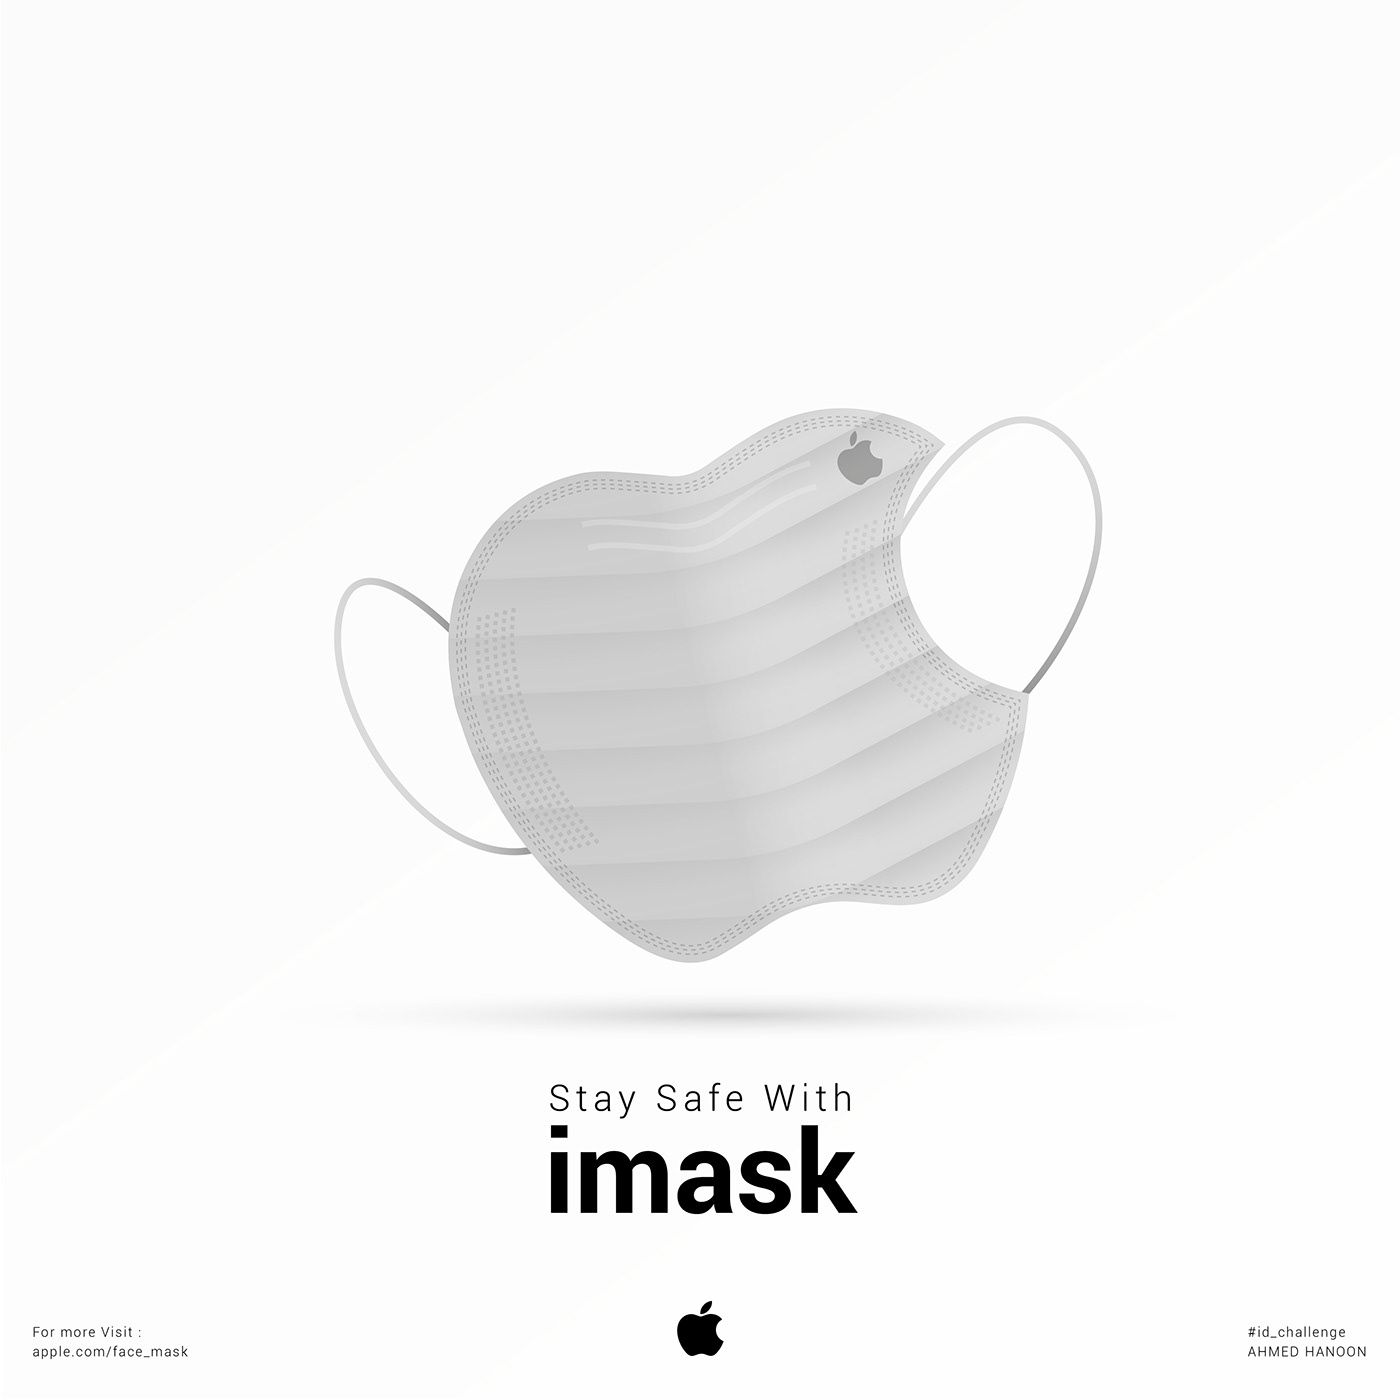 apple apple mask concept COVID19 Face mask gray mask package product safe